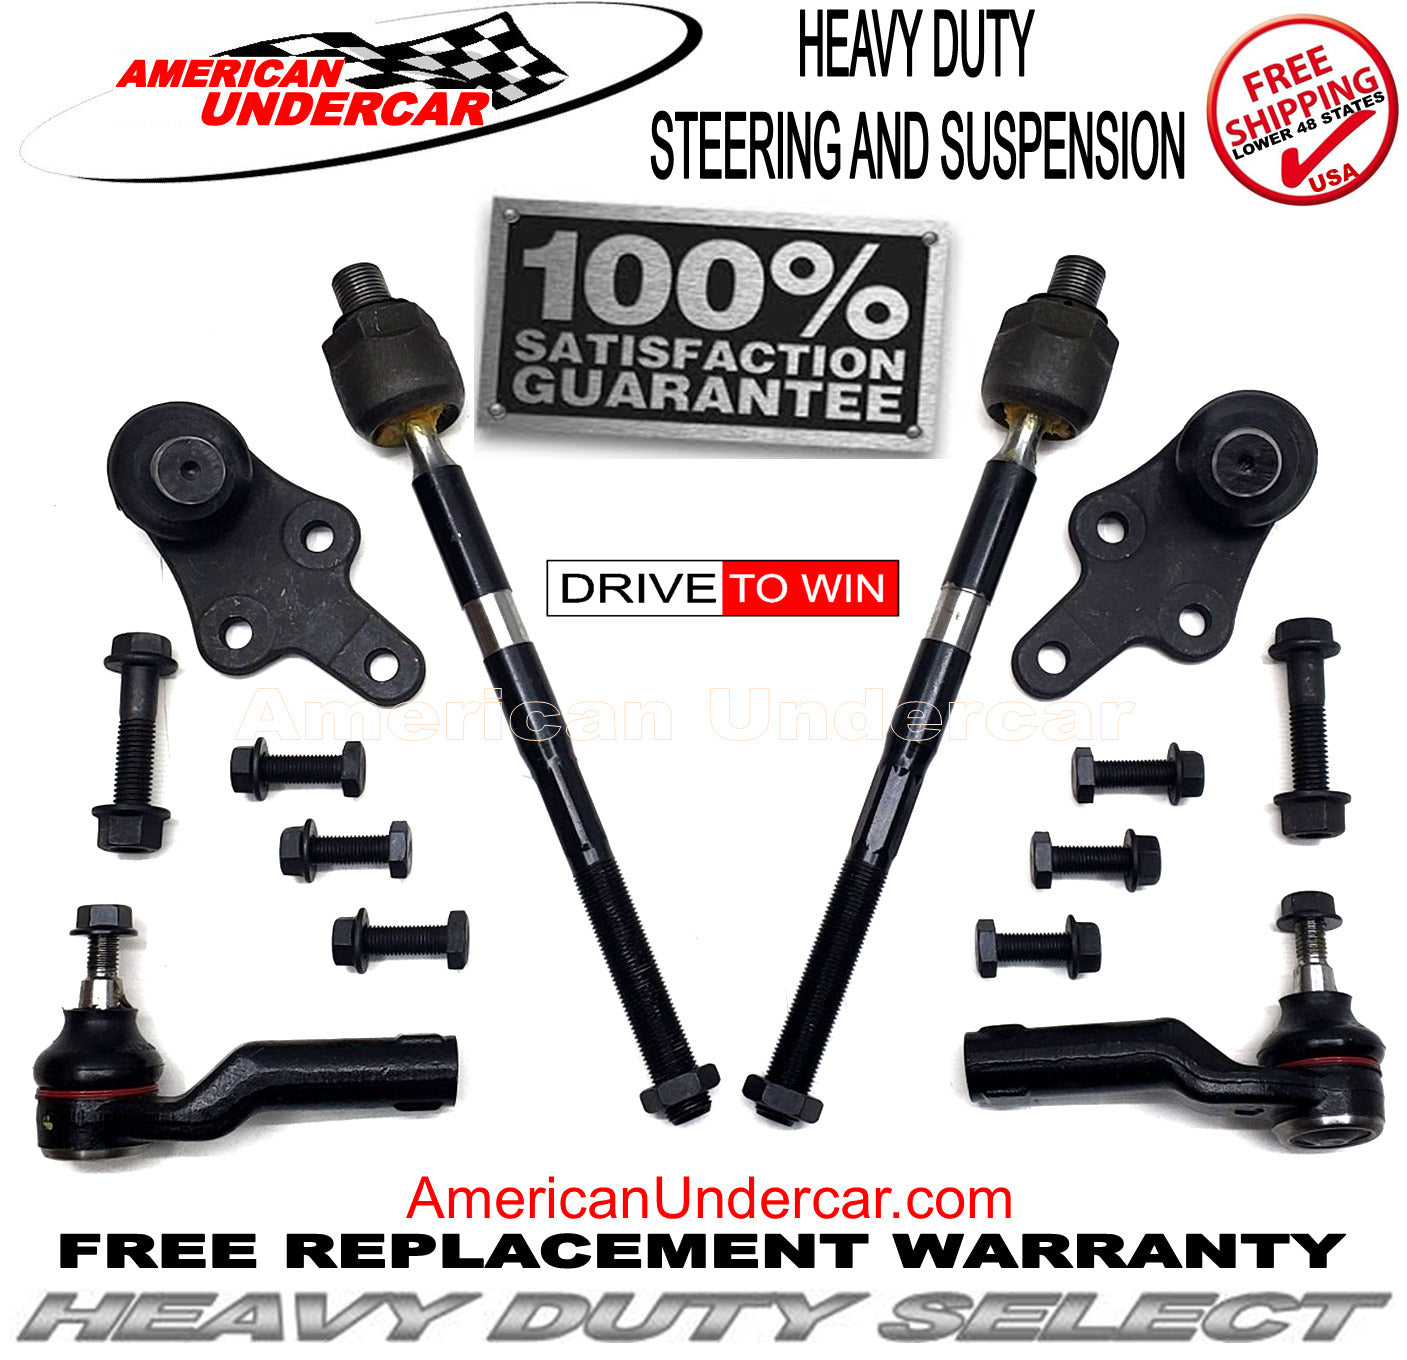 HD Ball Joints Tie Rod Steering Suspension Kit for 2014-2019 Ford Transit Connect 2WD